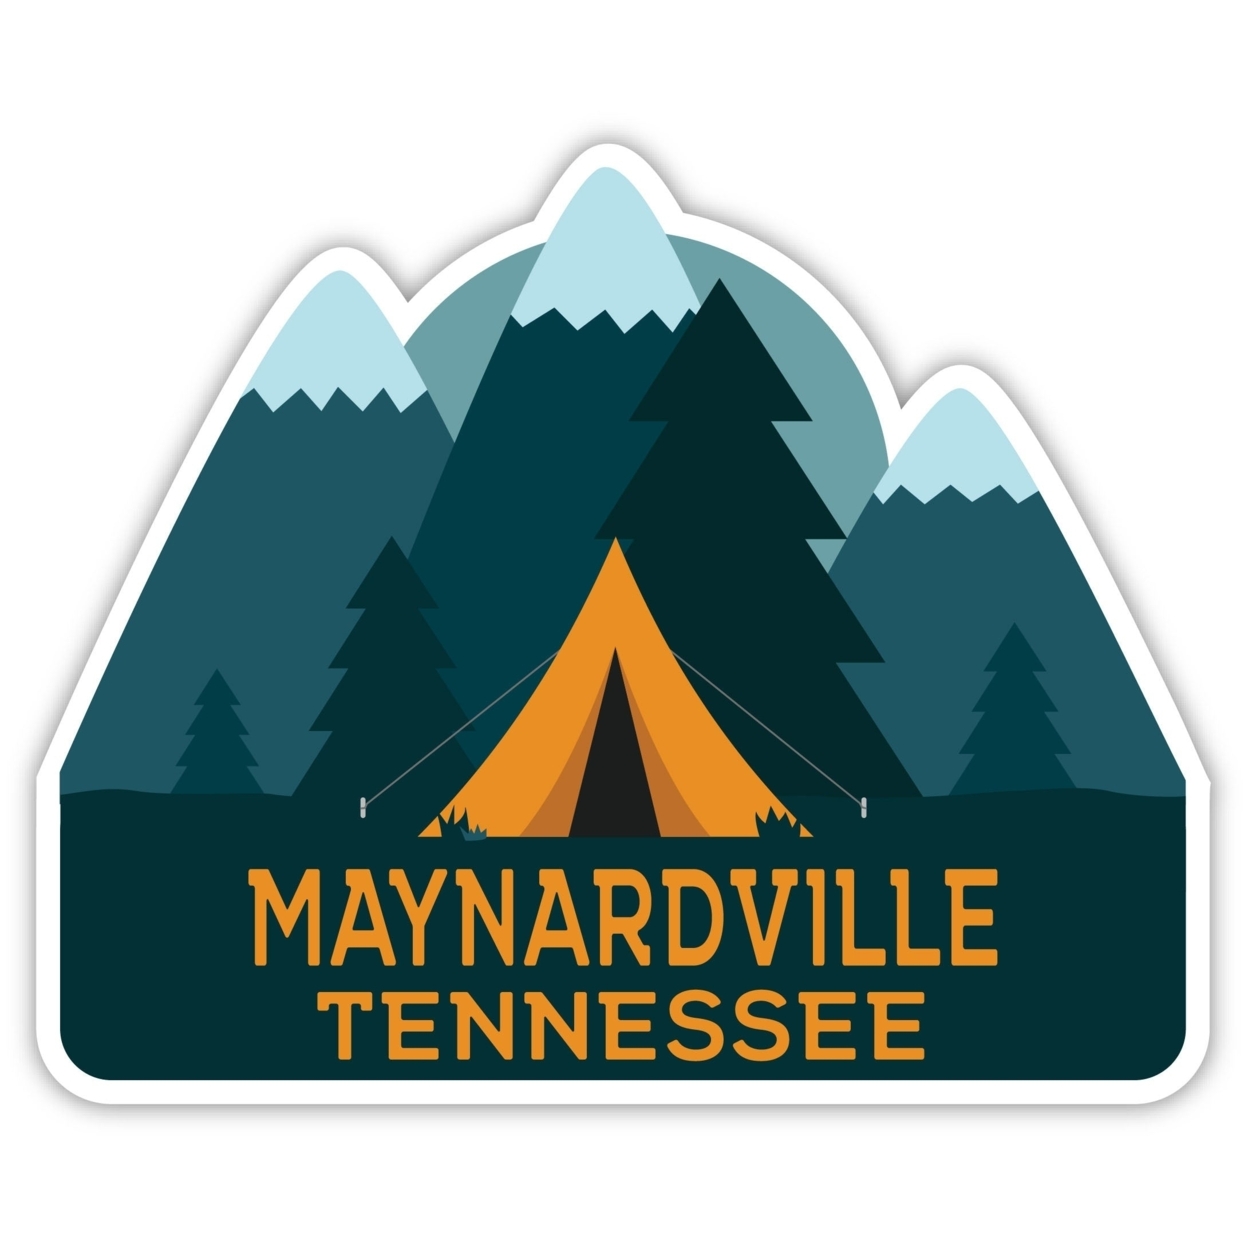 Maynardville Tennessee Souvenir Decorative Stickers (Choose Theme And Size) - 2-Inch, Tent